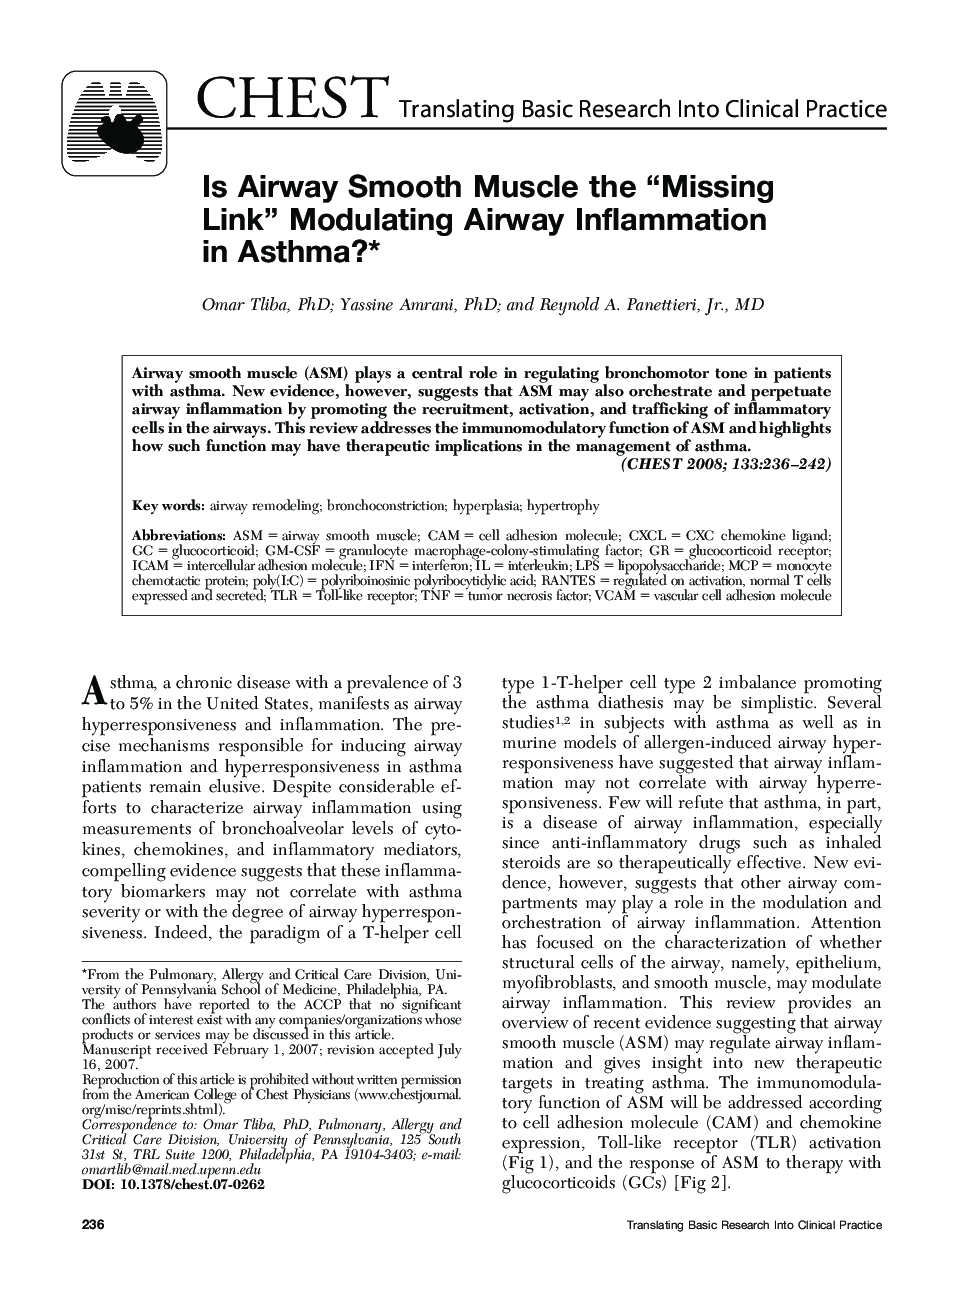 Is Airway Smooth Muscle the “Missing Link” Modulating Airway Inflammation in Asthma? 